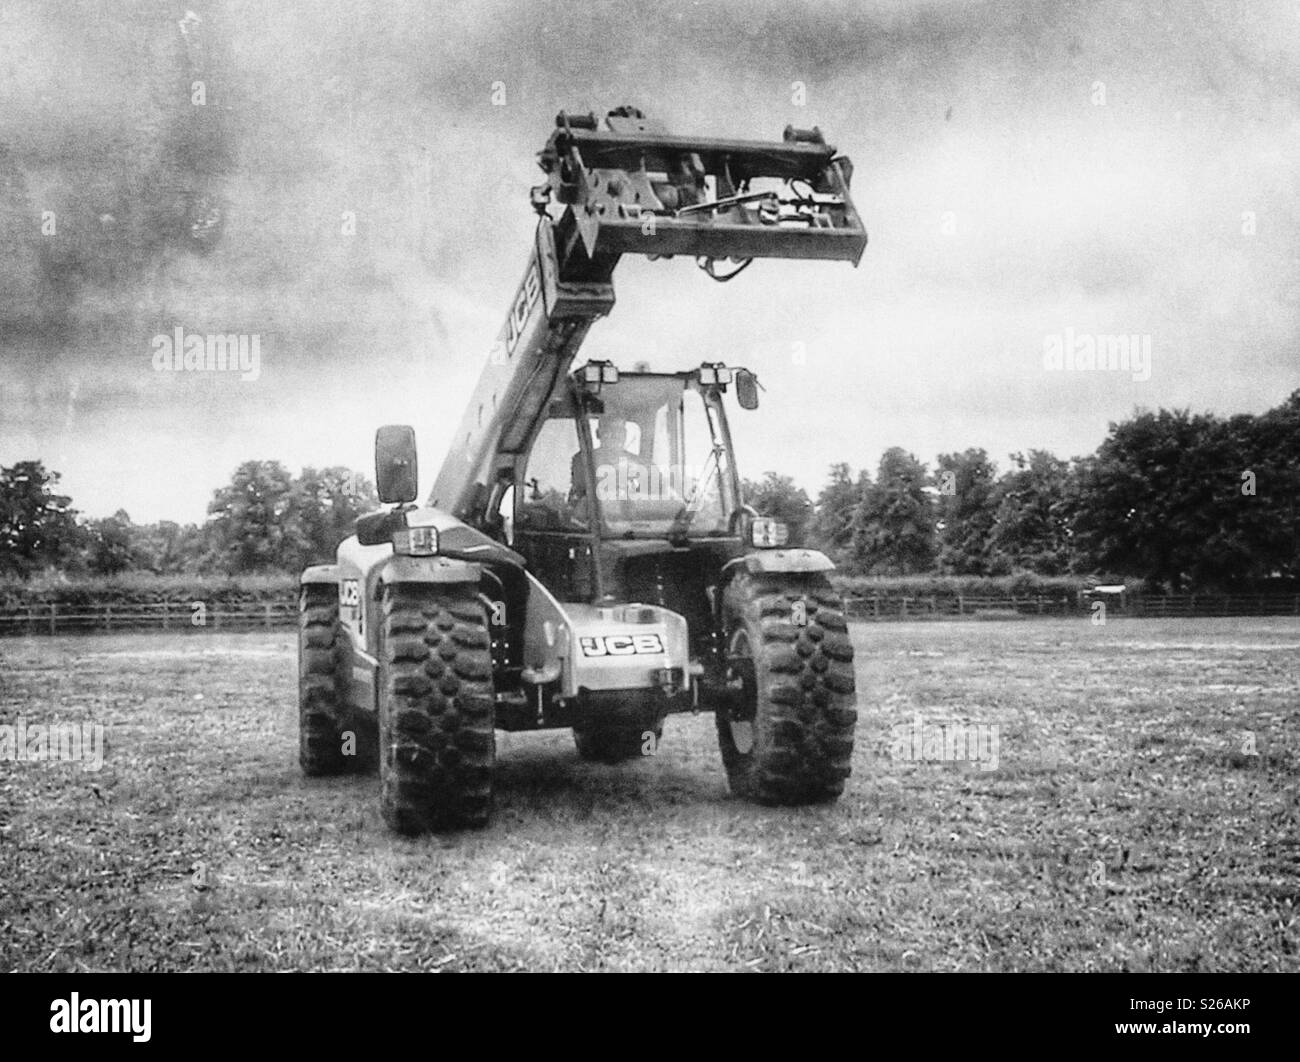 JCB tractor during presentation Stock Photo